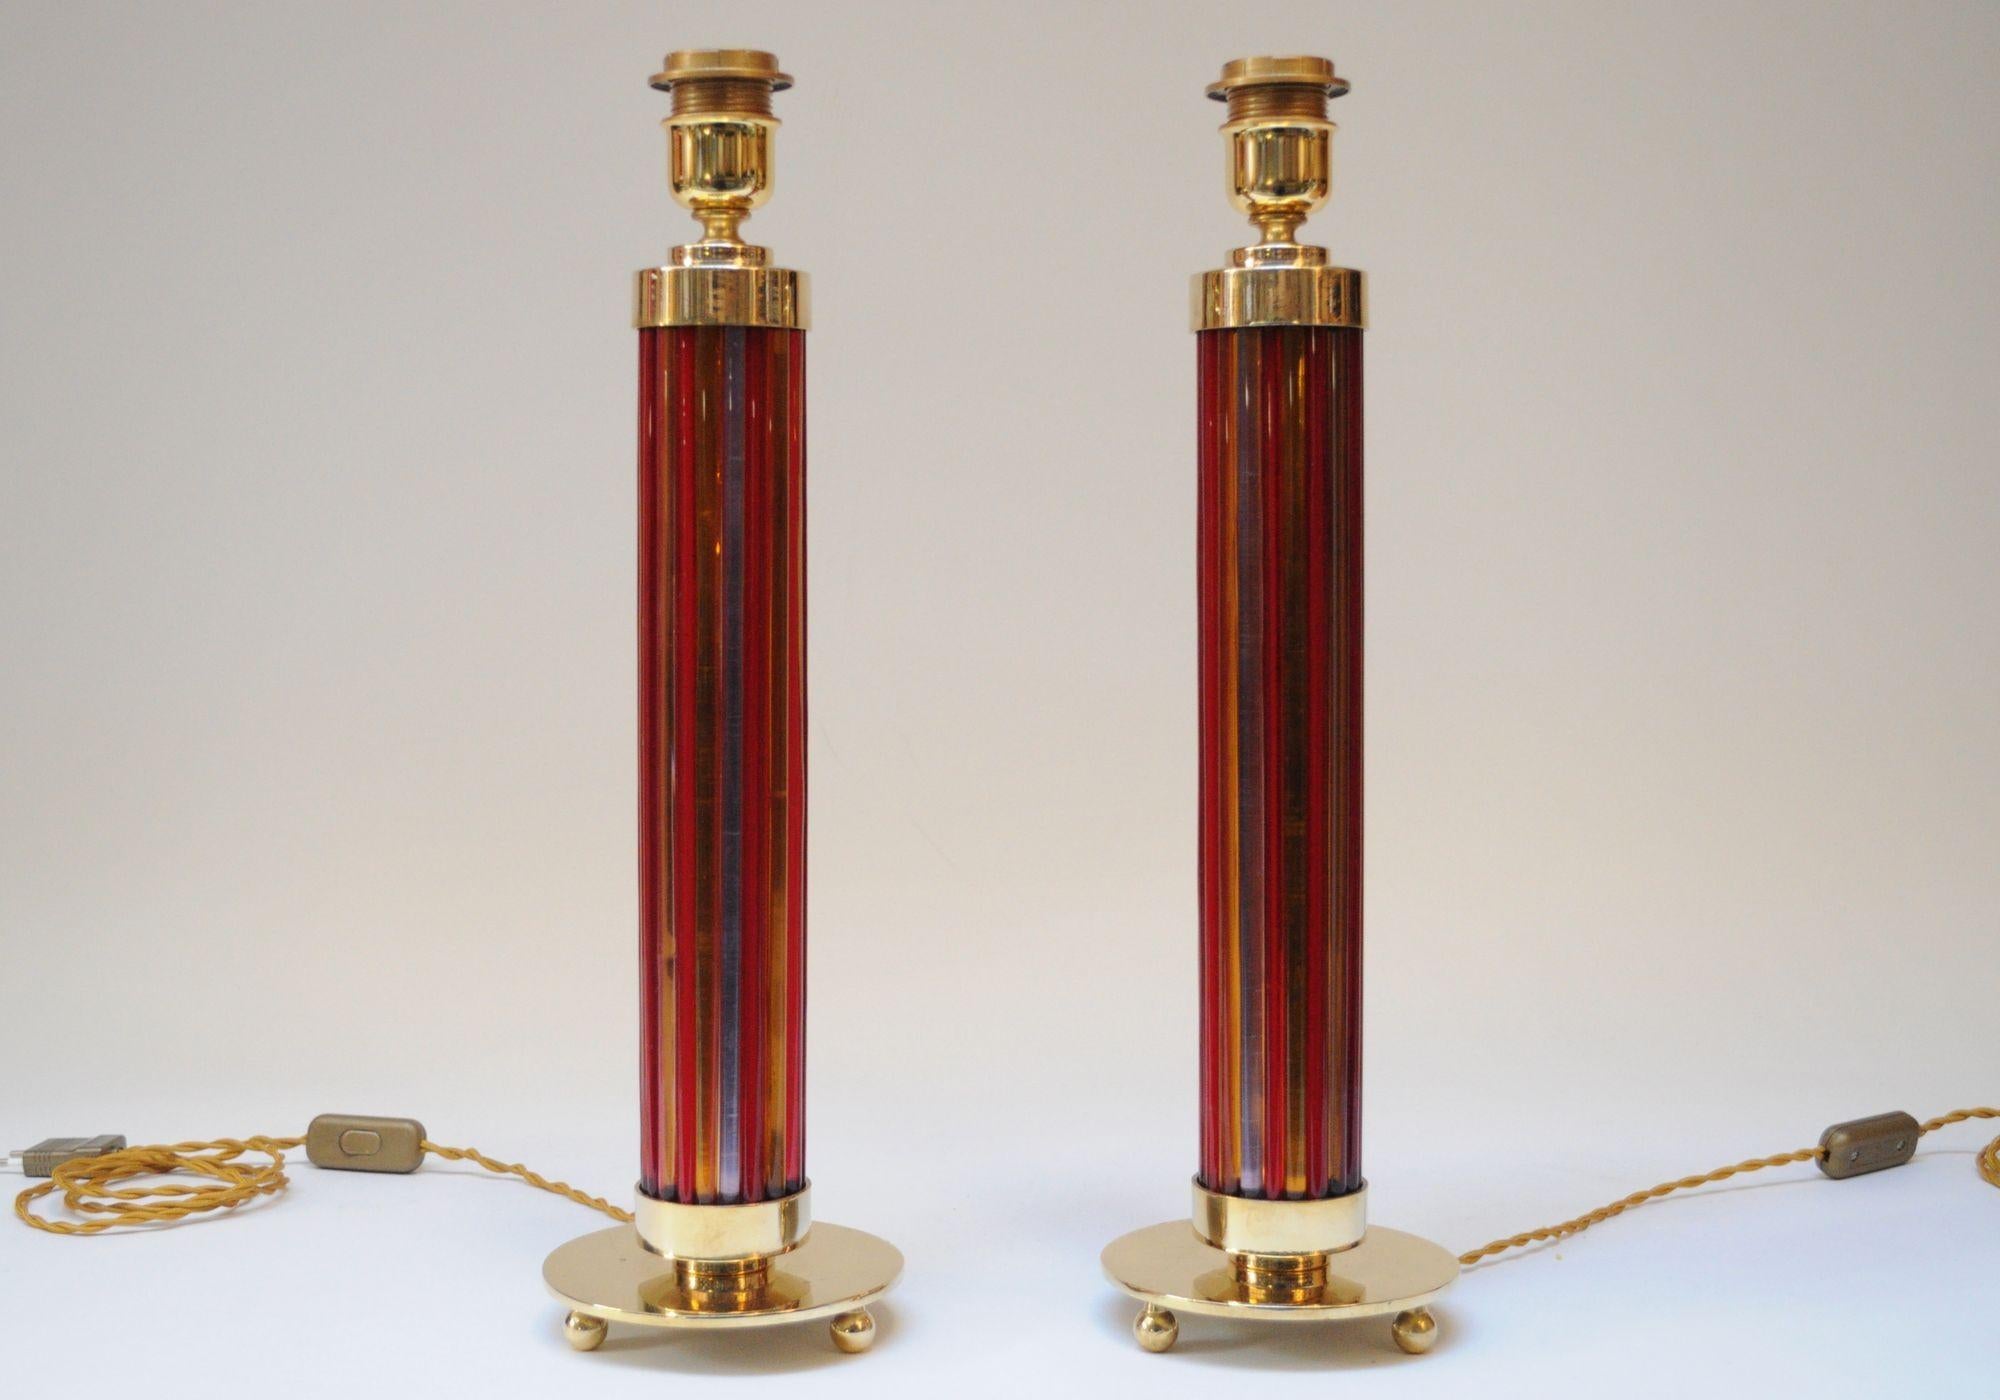 Colorful, elegant Murano tables lamp (ca. 1950s, Italy).
Composed of individual Murano glass pillars in orange, red, and purple forming columns, supported at the top and bottom by brass caps and a three orb-footed base.
Bubbles and marks in the